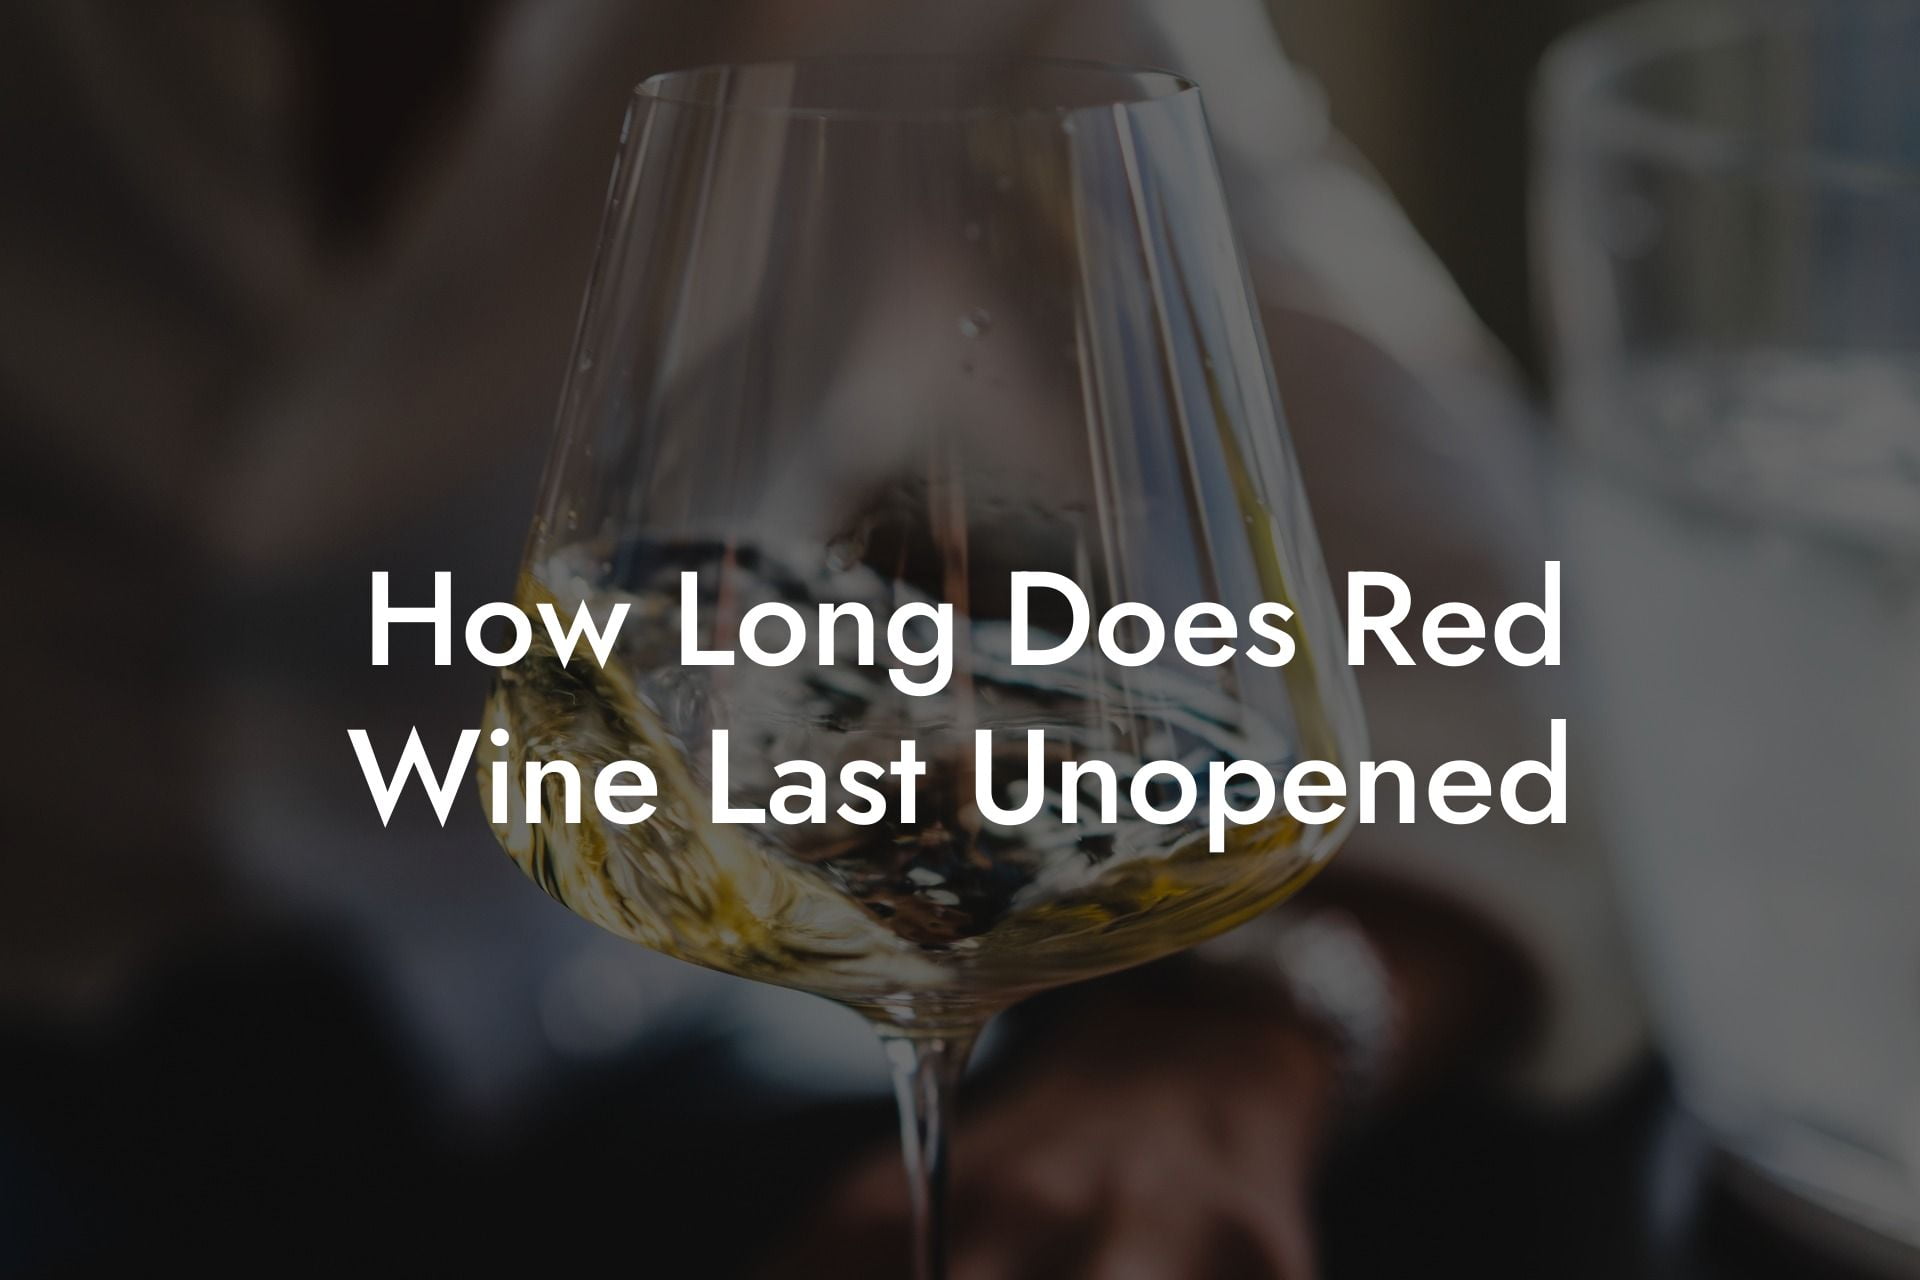 How Long Does Red Wine Last Unopened